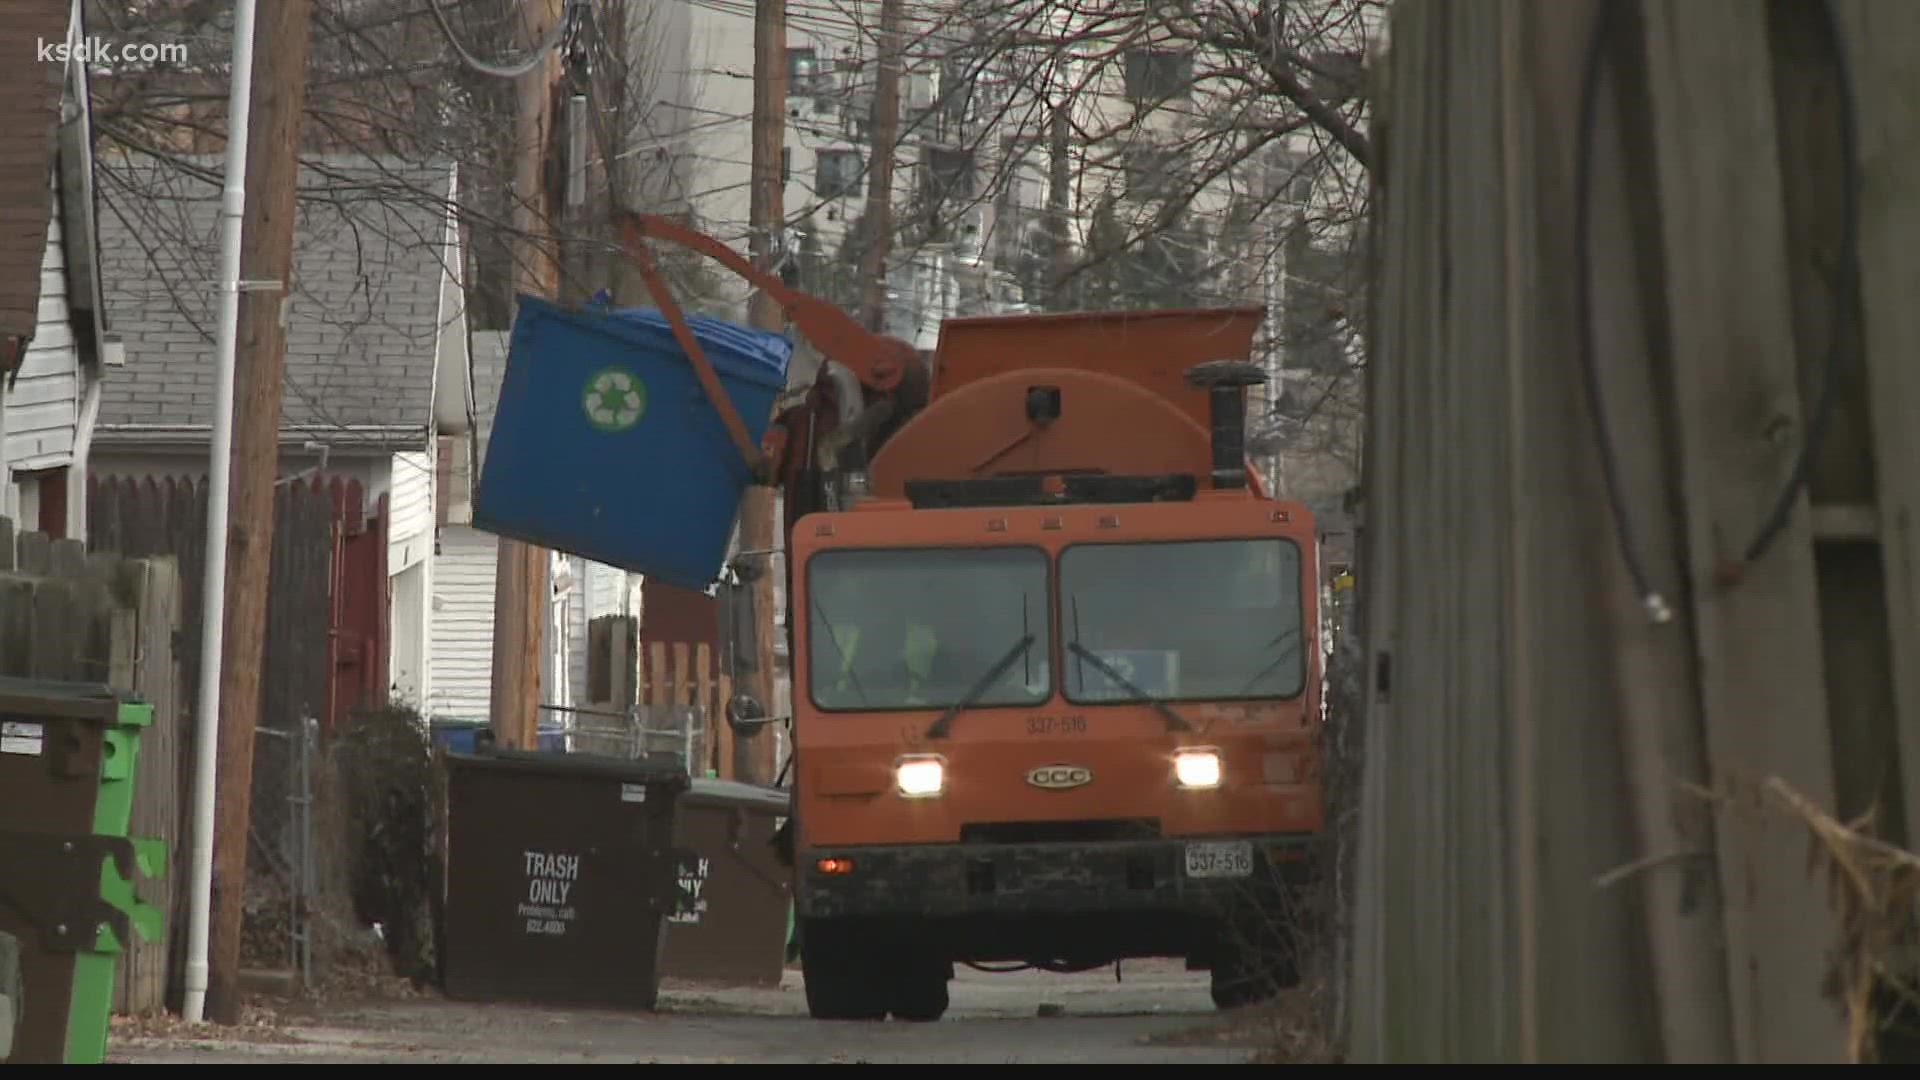 The city has stopped collecting some recycling but still keeps charging residents. Why?